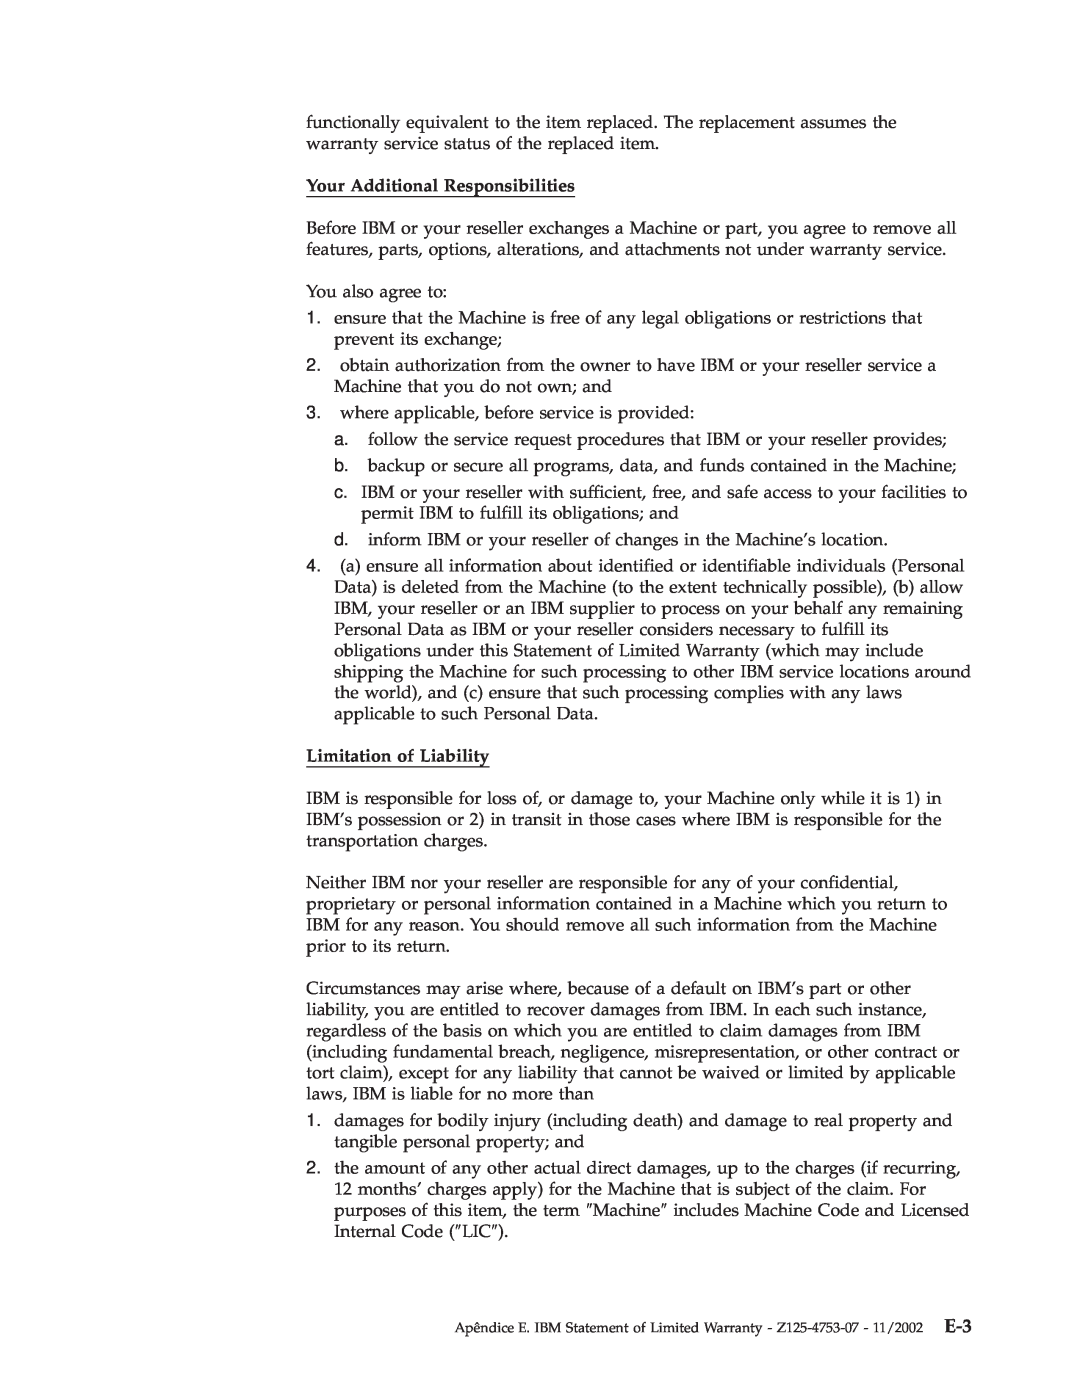 IBM M400 manual Your Additional Responsibilities, Limitation of Liability 